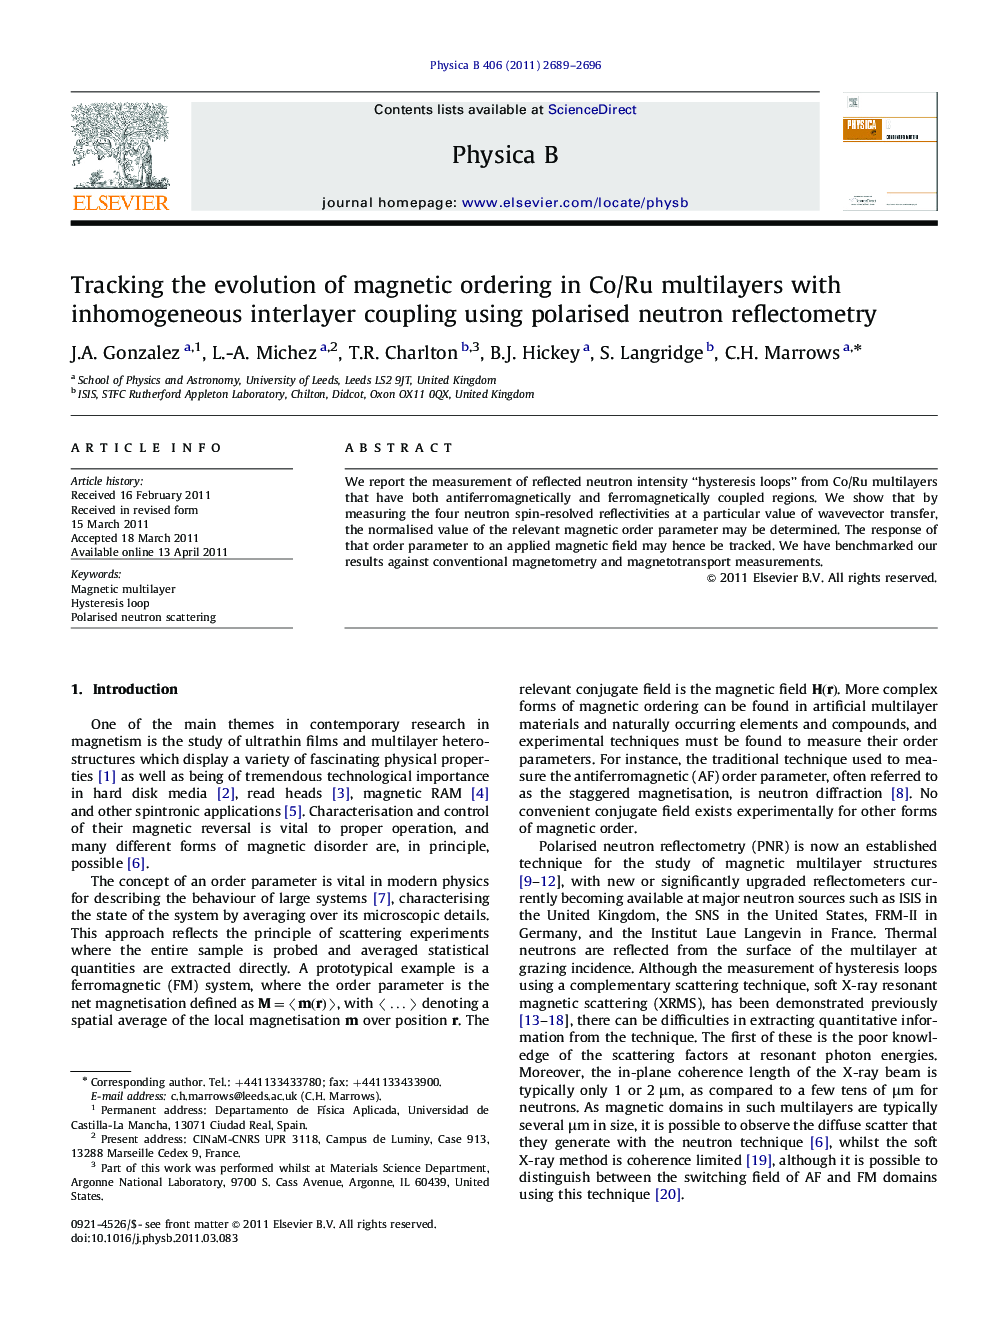 Tracking the evolution of magnetic ordering in Co/Ru multilayers with inhomogeneous interlayer coupling using polarised neutron reflectometry